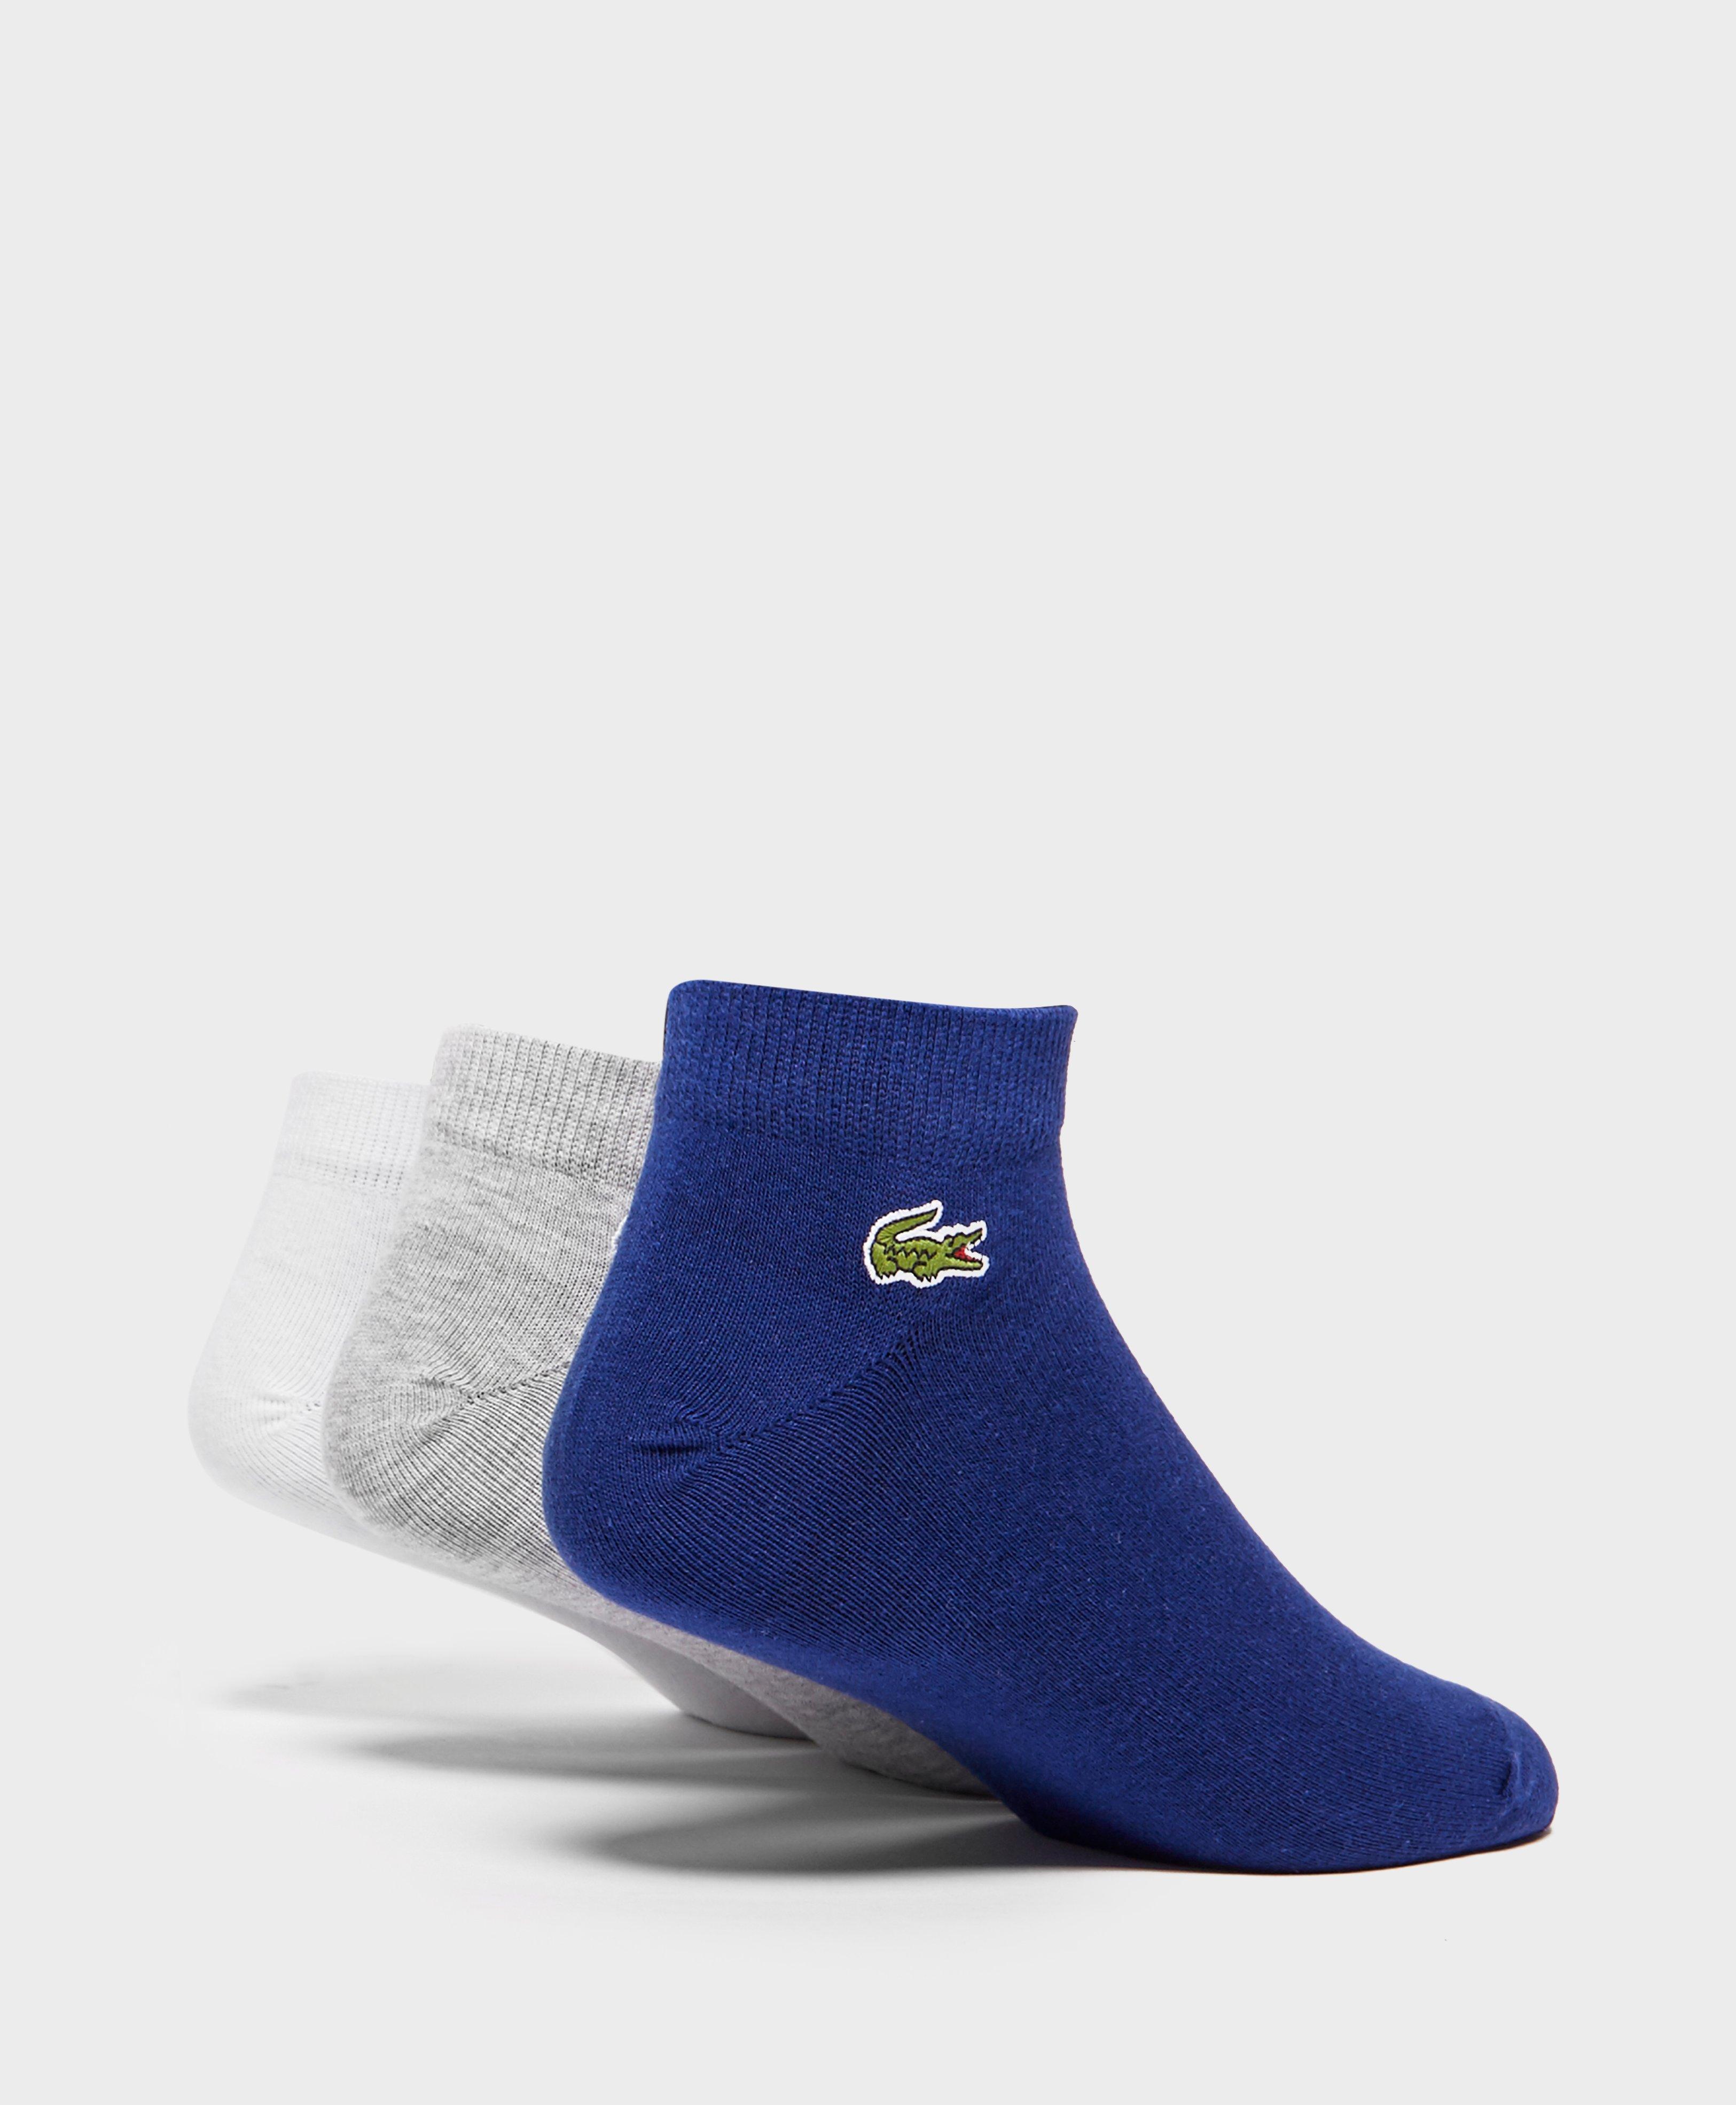 Lacoste Cotton 3-pack Trainer Socks in Blue for Men - Lyst